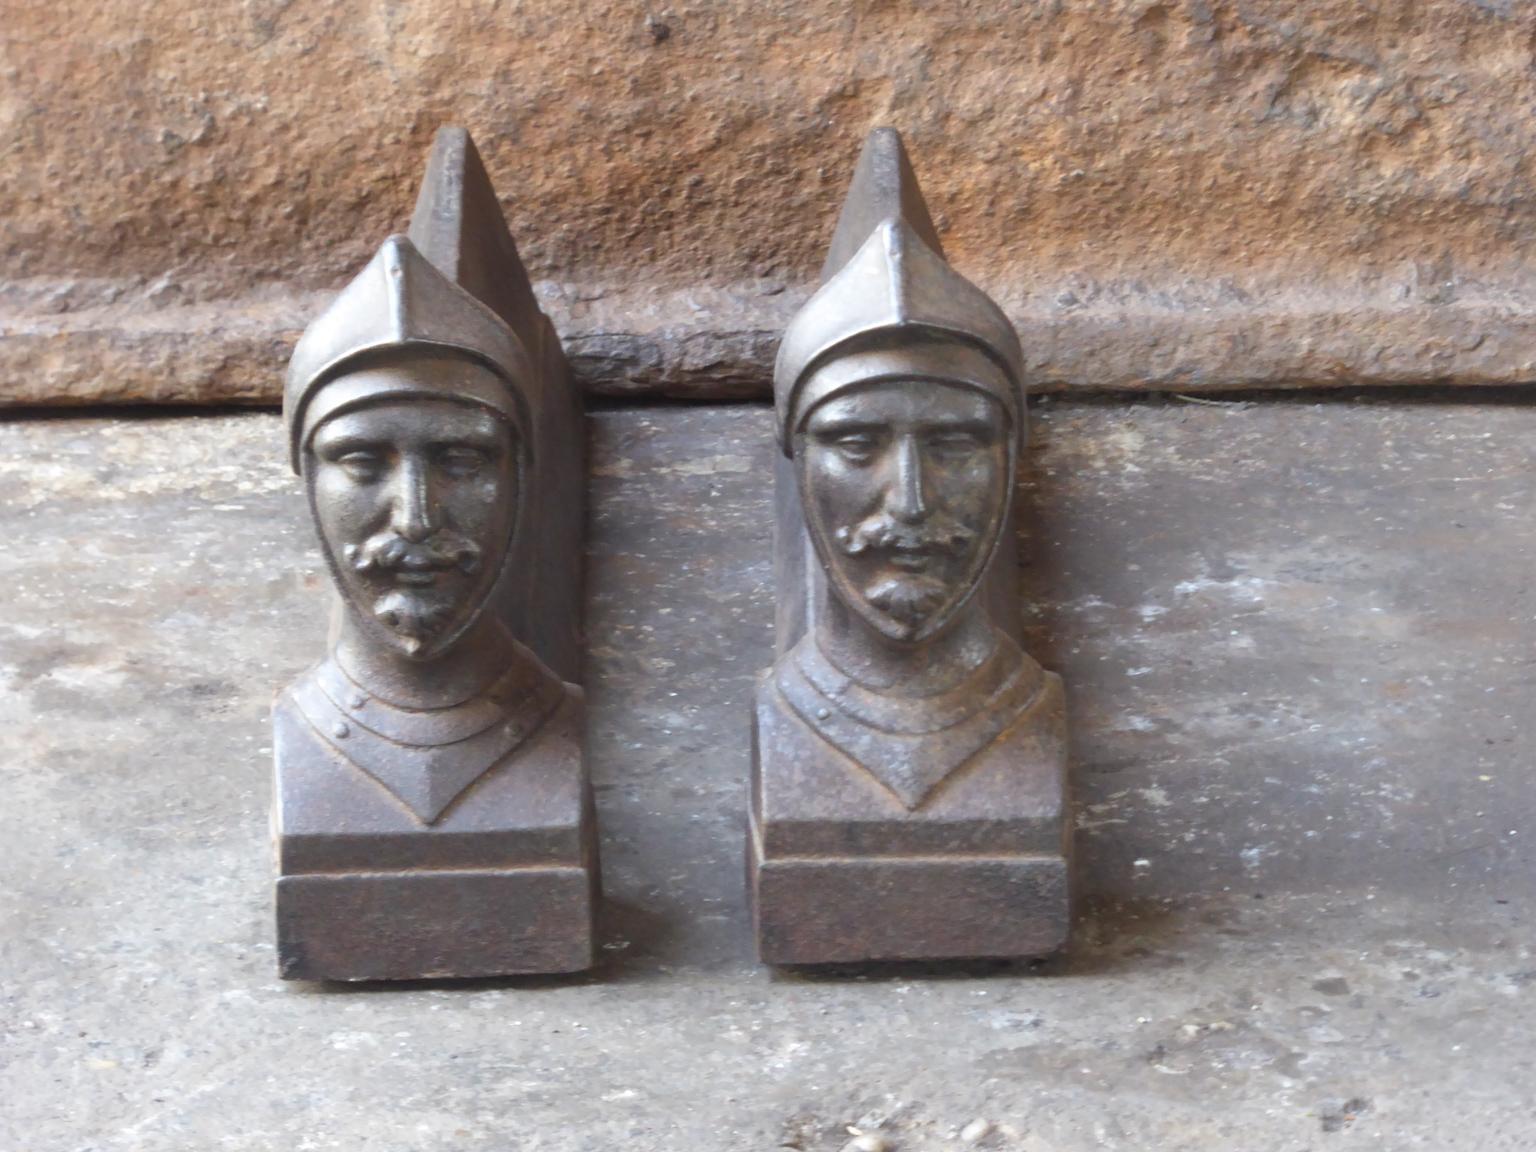 19th century French Napoleon III andirons of D'Artagnan, the best known hero of the Three Musketeers. The andirons are made of cast iron and have a natural brown patina. Upon request they can be made black / pewter. The condition is good.